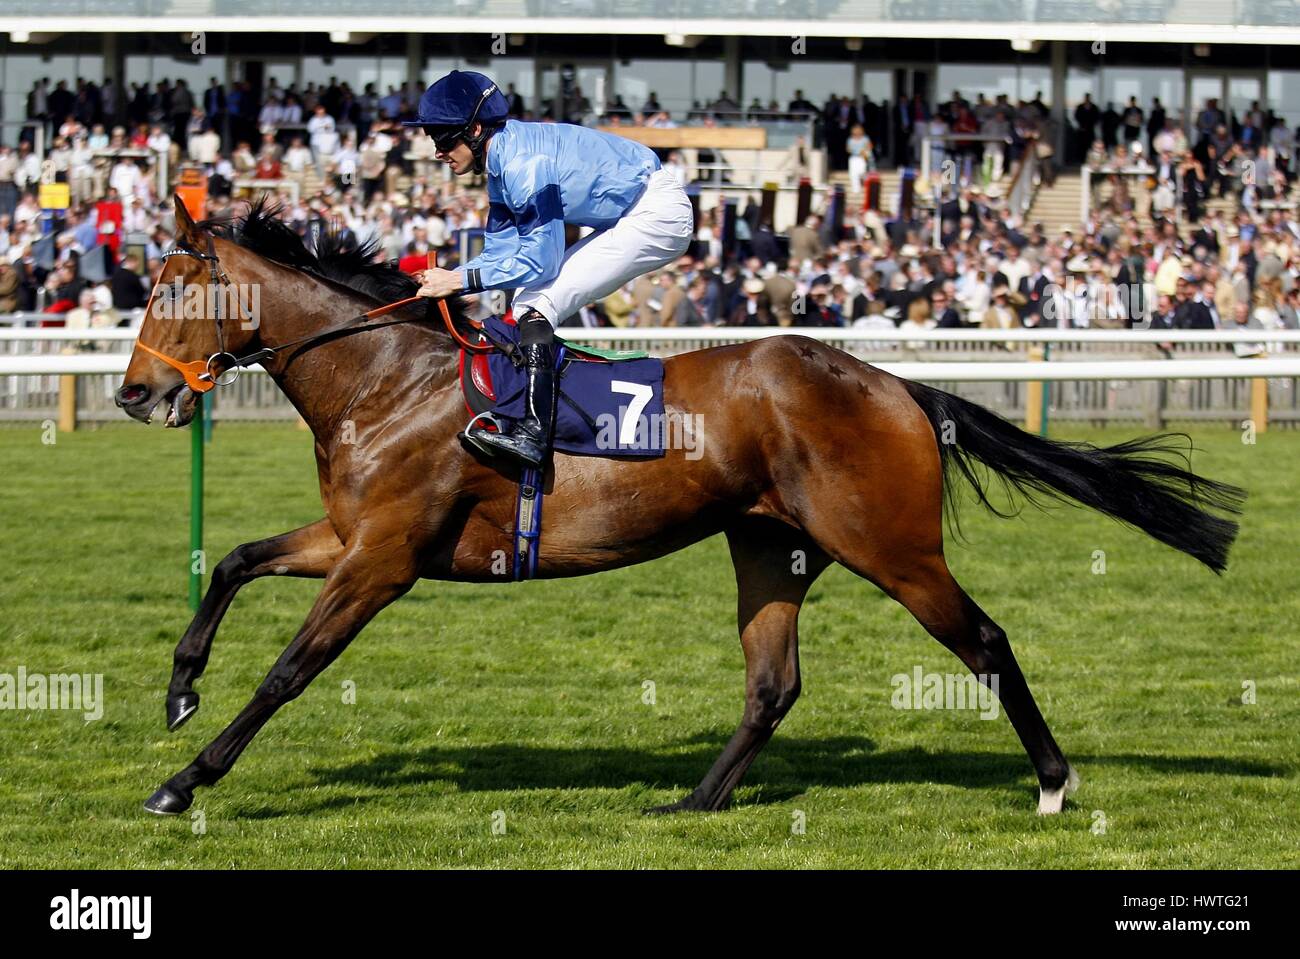 ASSET RIDDEN BY RICHARD HUGHES ROWLEY MILE COURSE NEWMARKET ENGLAND 19 April 2007 Stock Photo